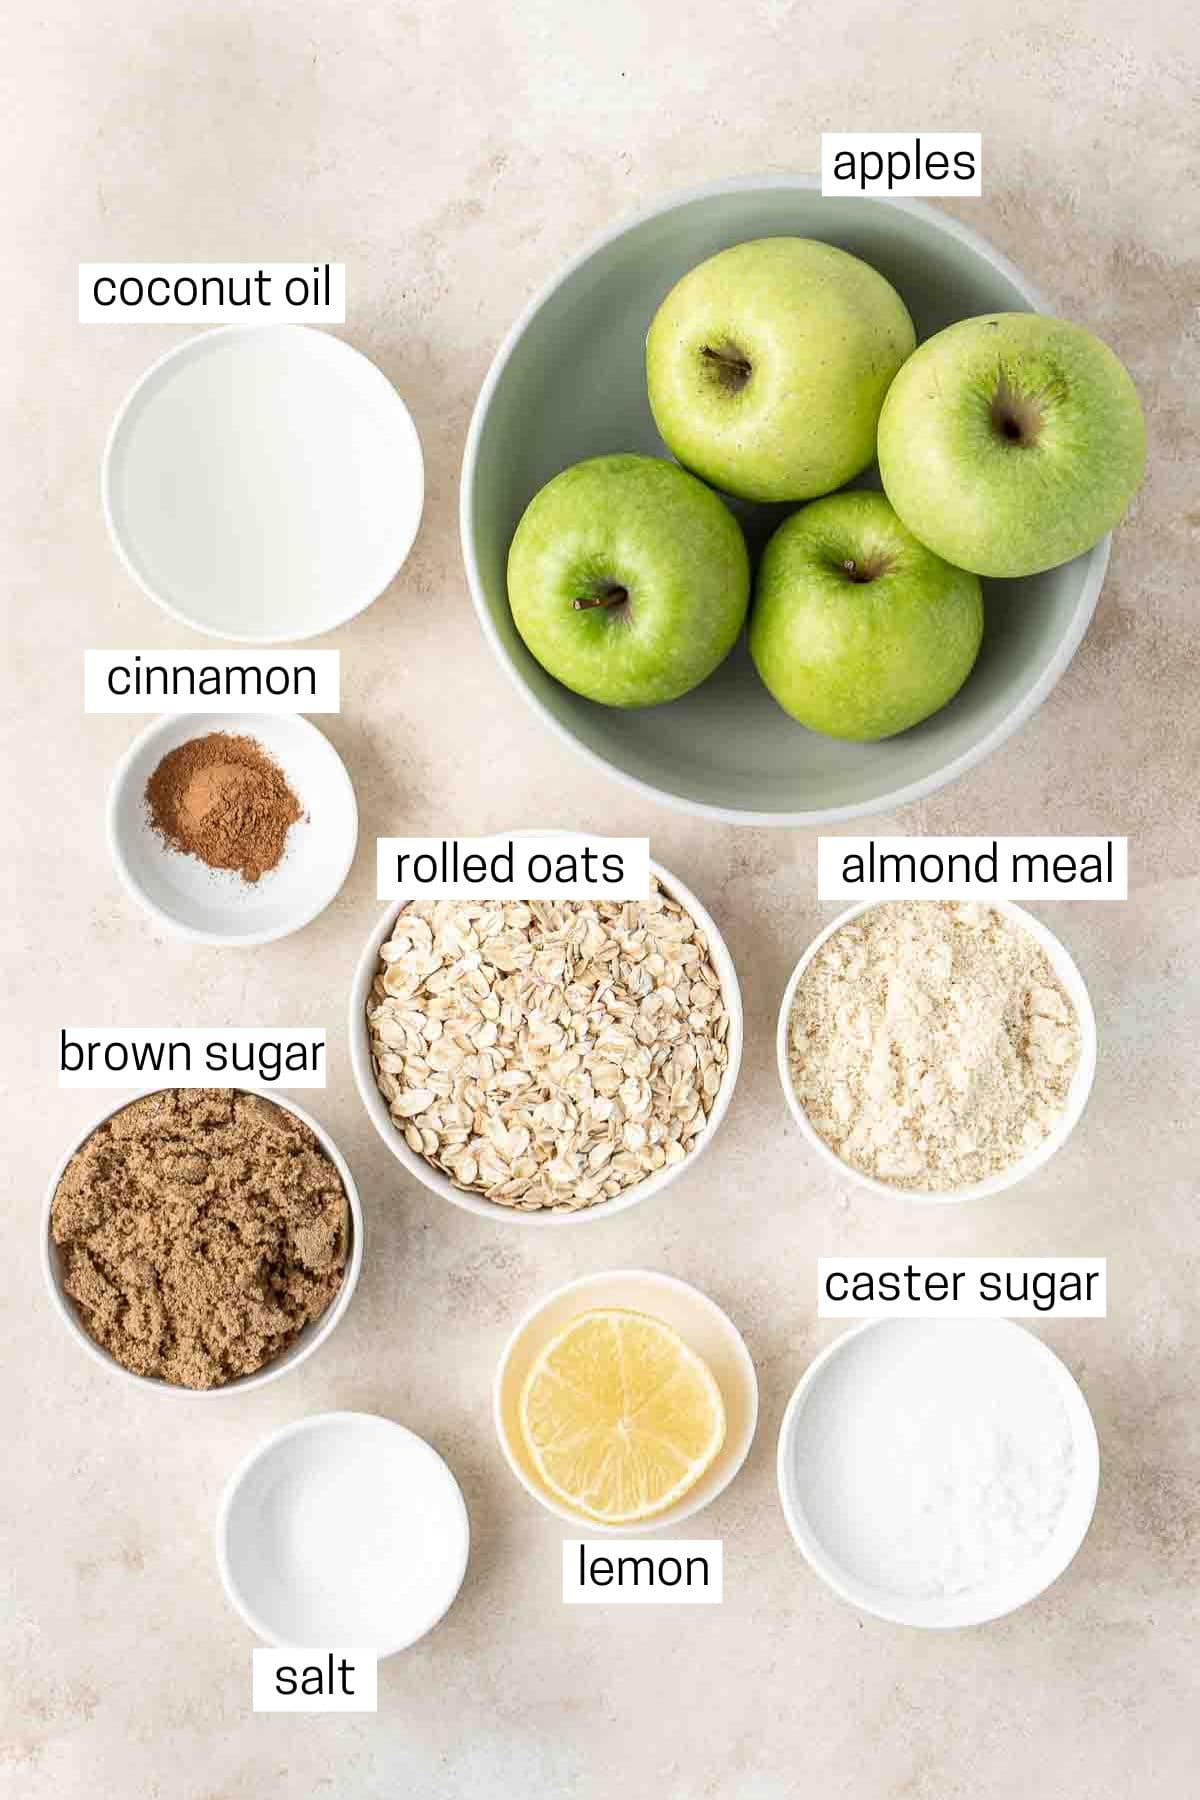 All ingredients needed to make apple crumble laid out in bowls.